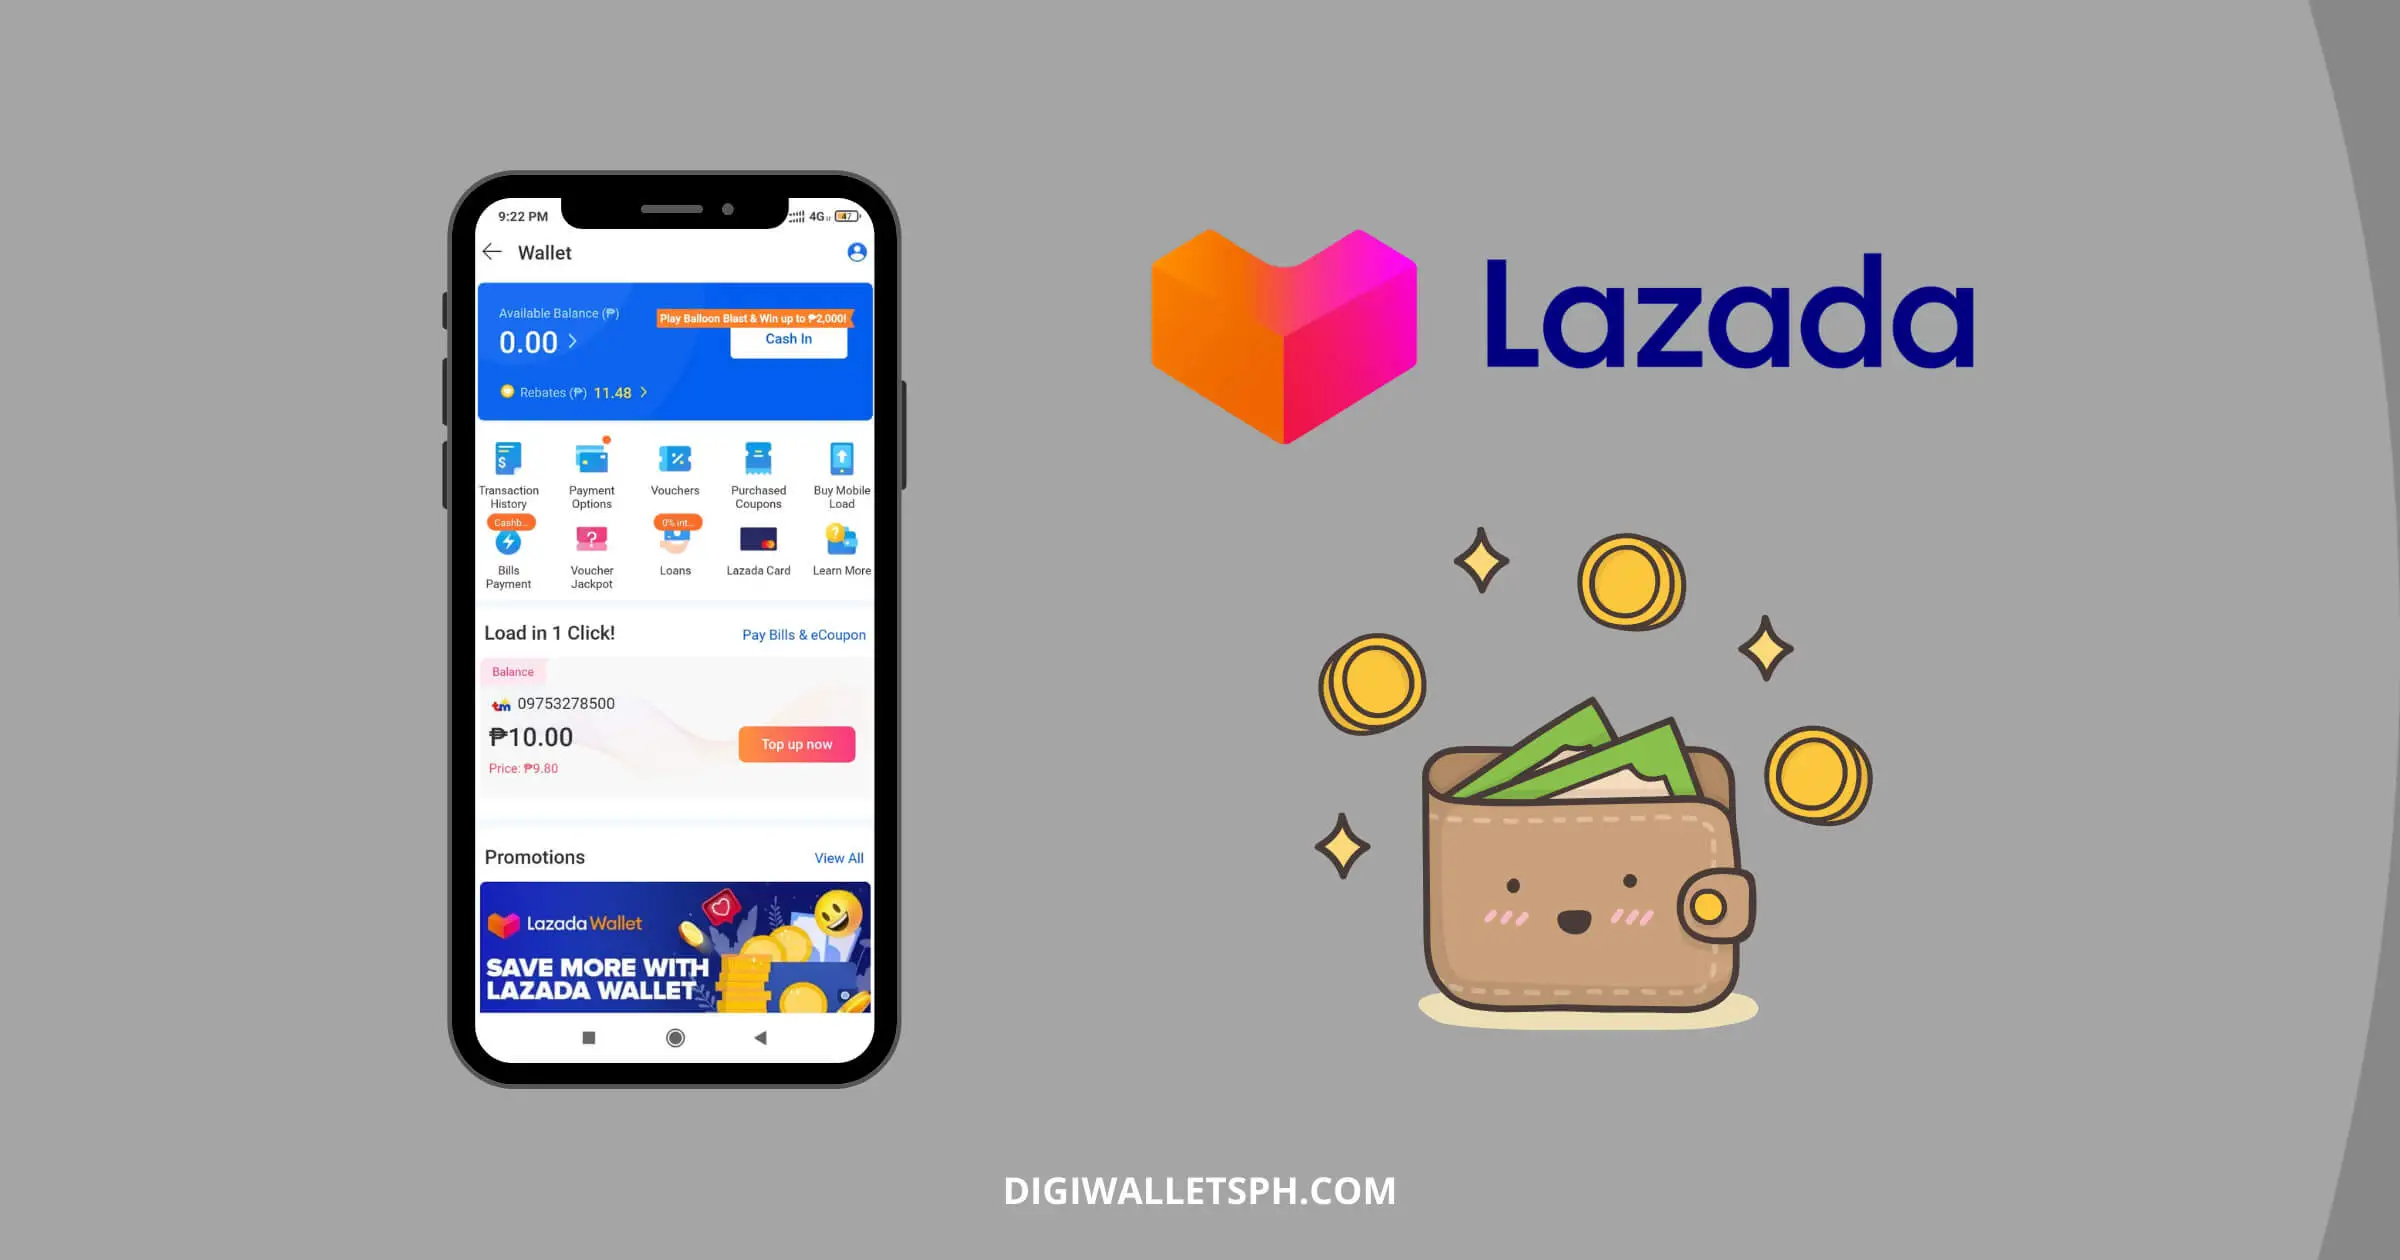 How to load lazada wallet